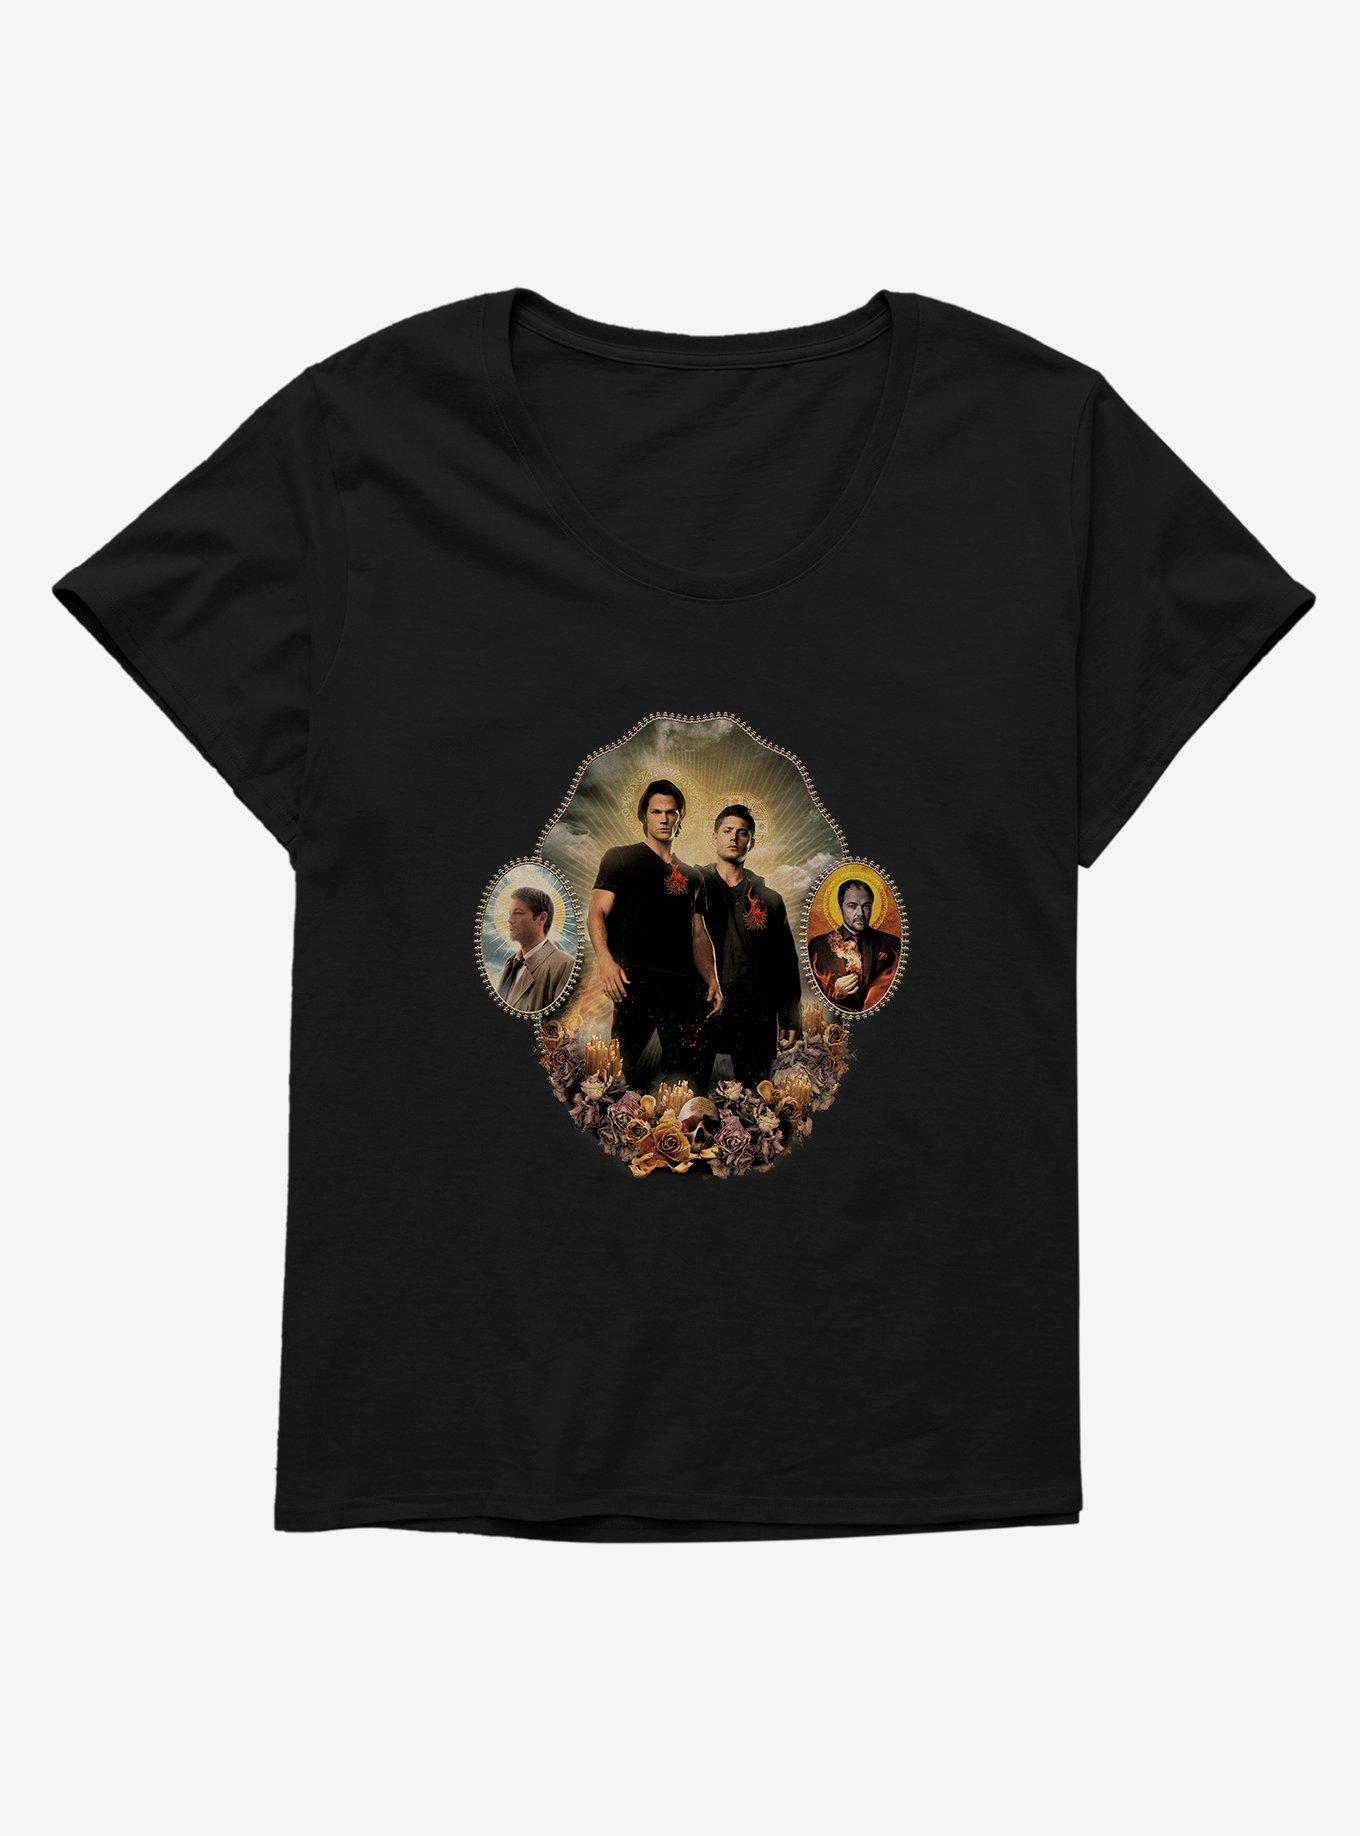 Supernatural Characters With Halos Girls T-Shirt Plus